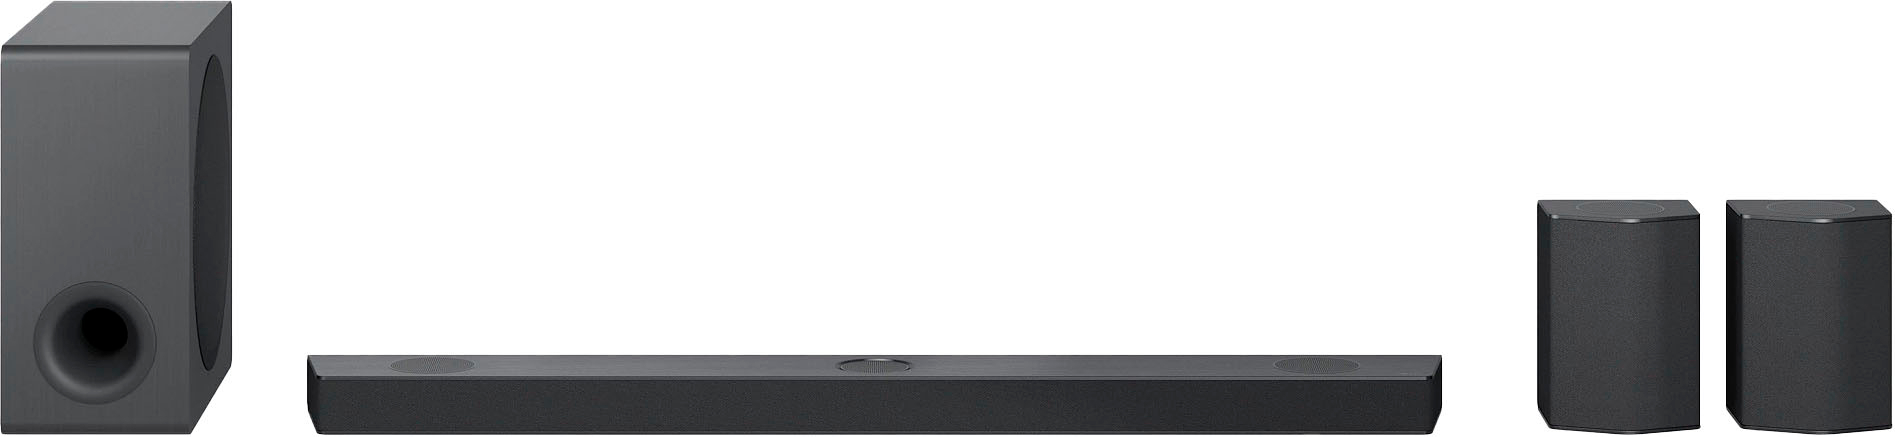 LG 9.1.5 Channel Soundbar with Wireless Subwoofer, Dolby Atmos and DTS:X  Black S95QR - Best Buy